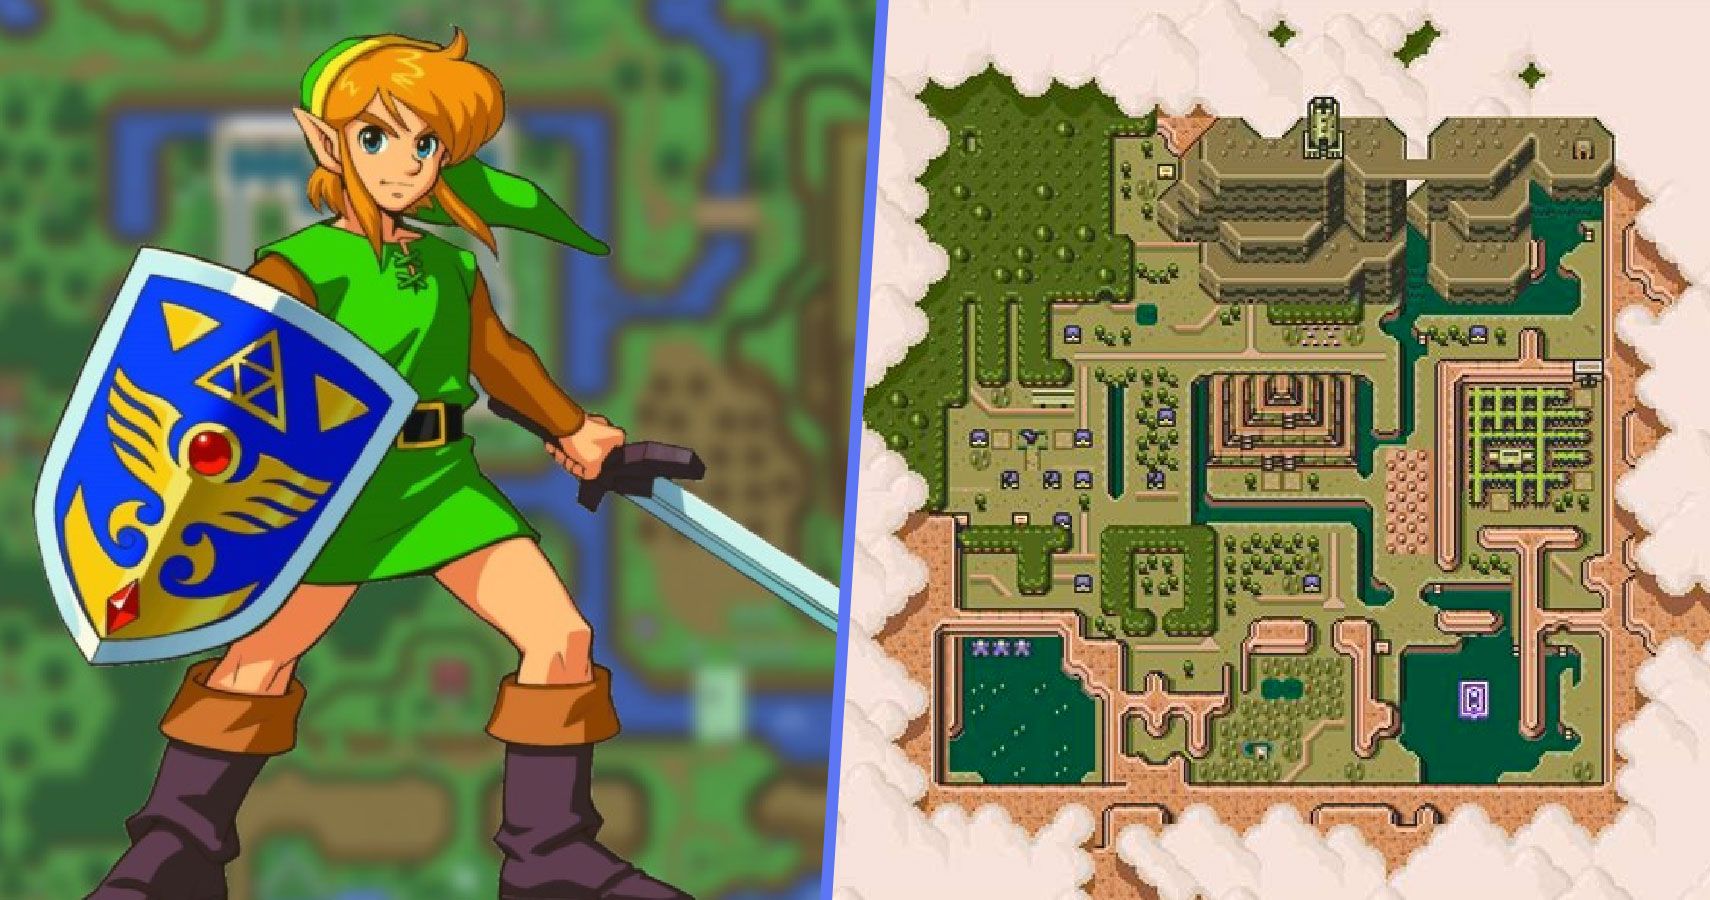 a link to the past